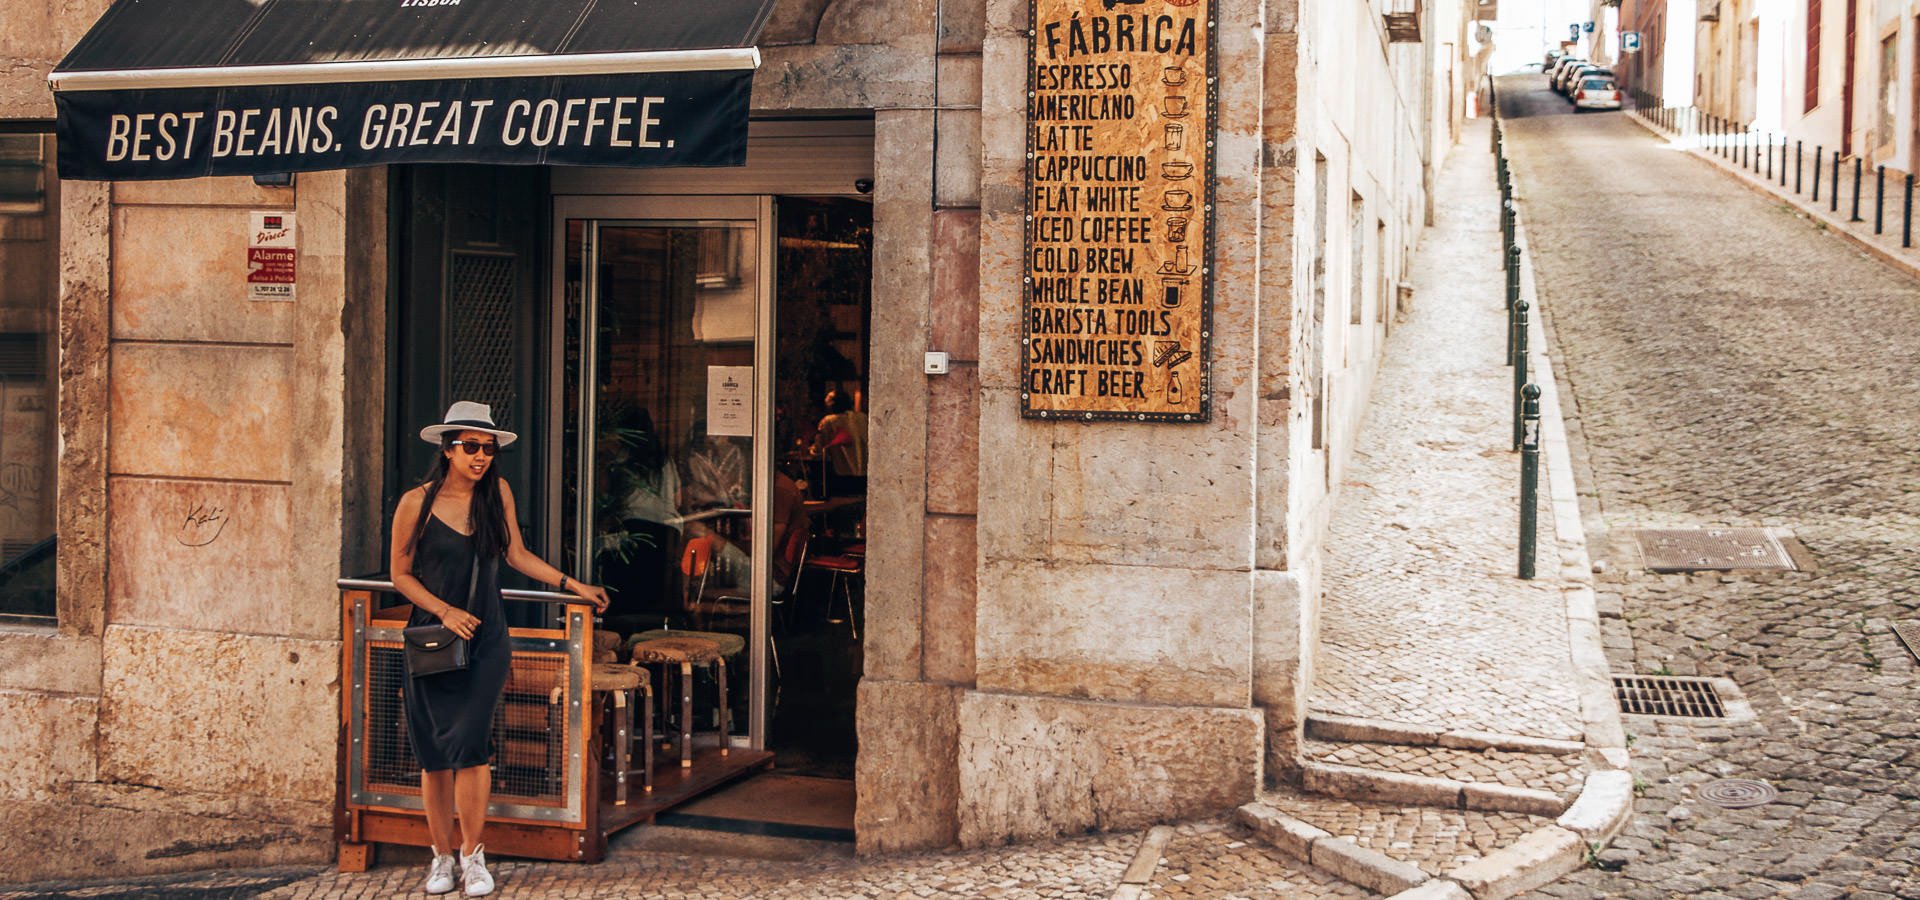 The 5 Best Cafes In Lisbon Portugal | 3 days in lisbon 2